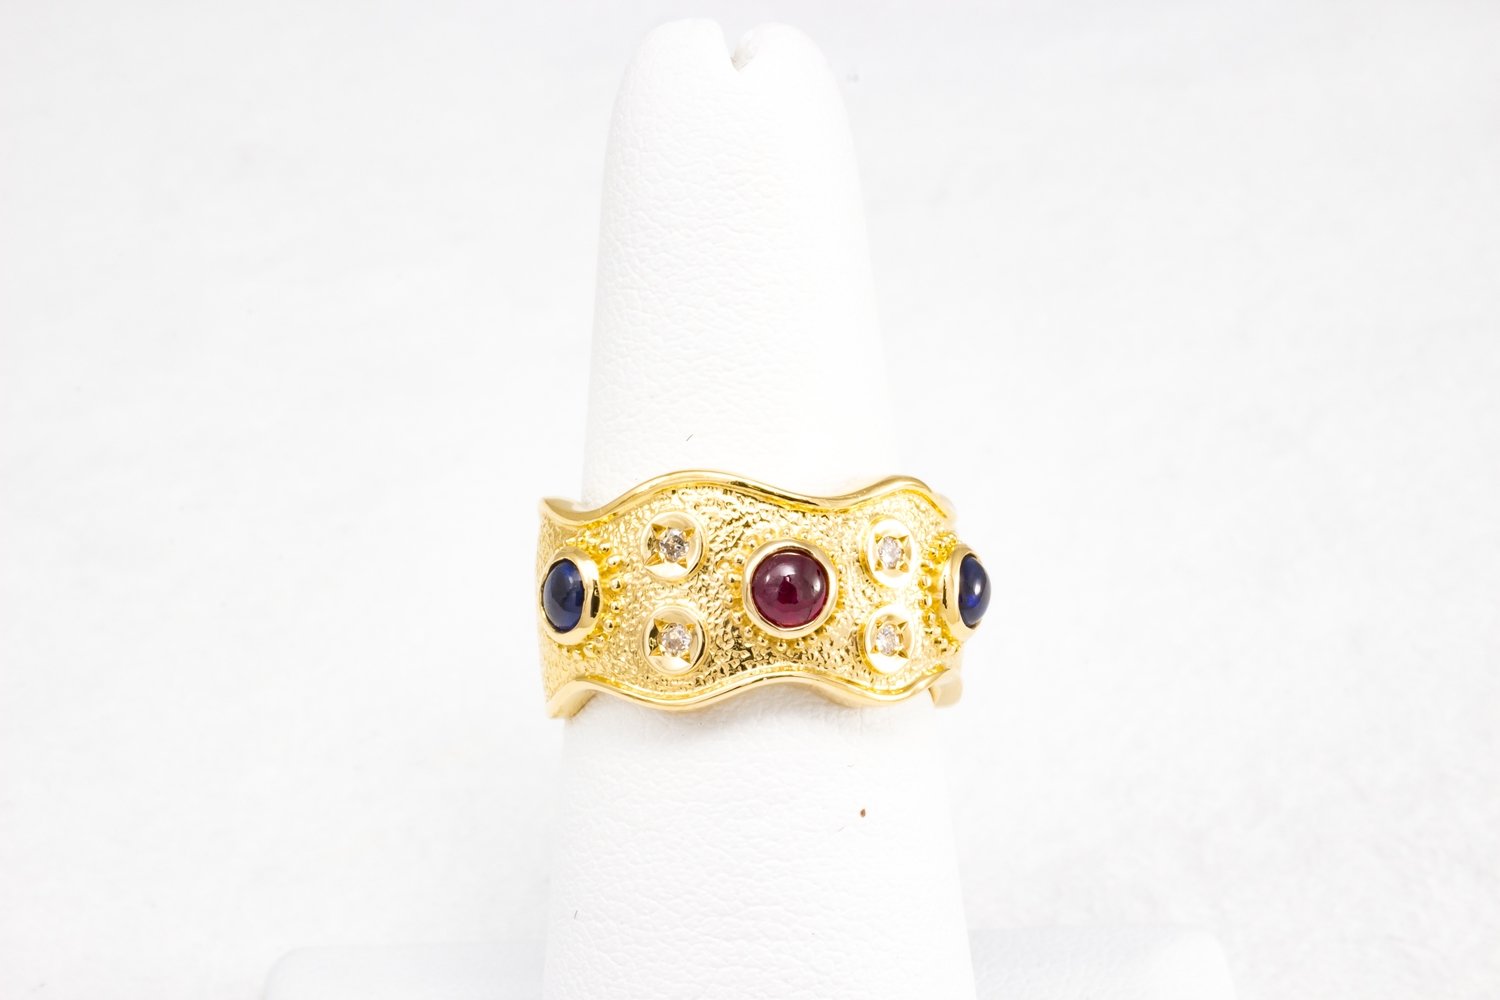 Ruby, Sapphire and Diamond Ring